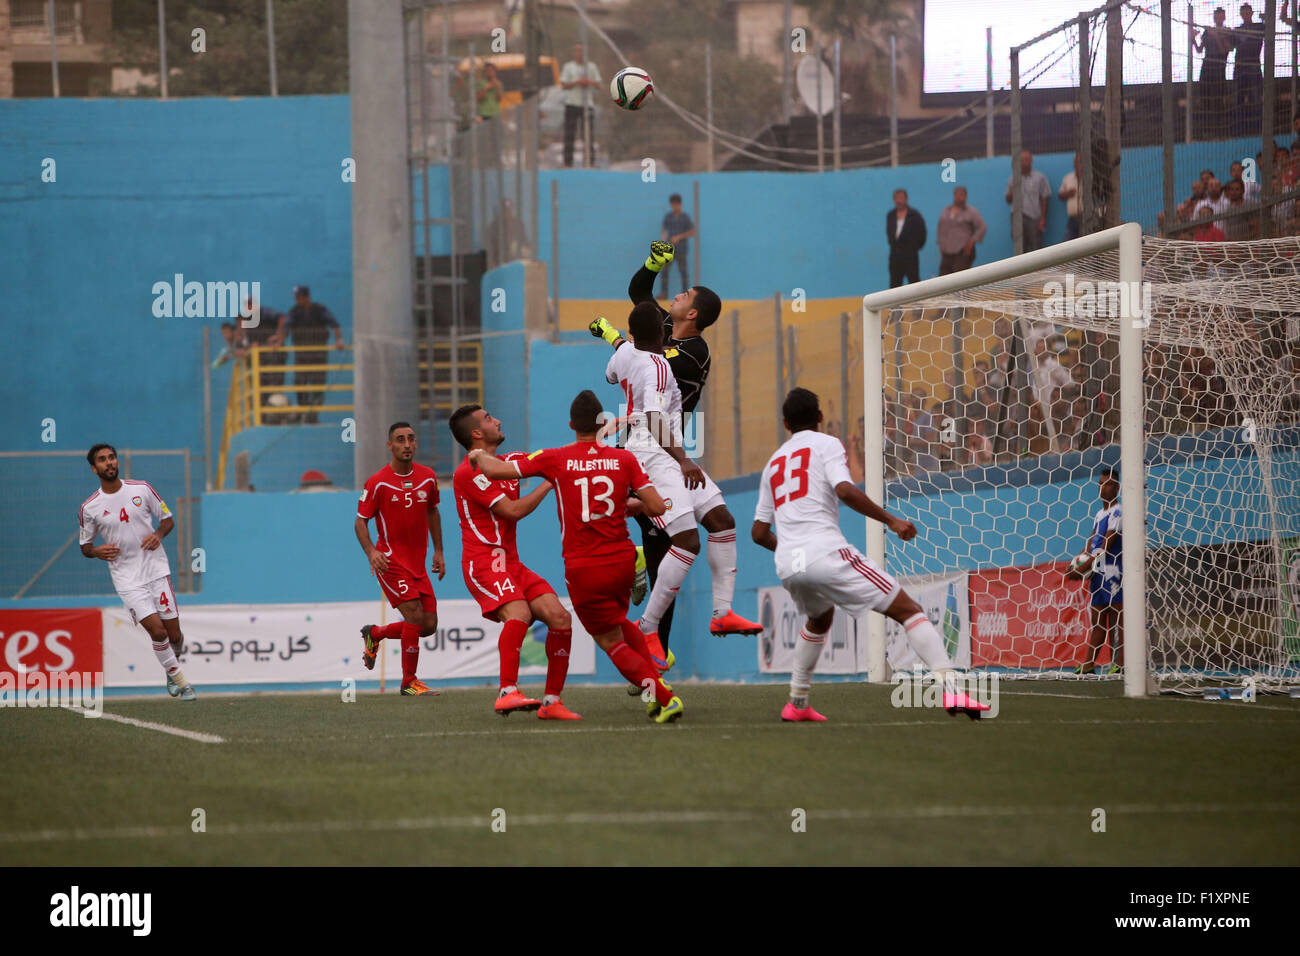 Sept. 8, 2015 - Al-Ram, West Bank, Palestinian Territory - Palestinian players vies for the ball with UAE players during their 2018 FIFA World Cup qualifying football match between Palestine and UAE, at the Faisal al-Husseini Stadium, on September 8, 2015 in the West Bank town of Al-Ram © Shadi Hatem/APA Images/ZUMA Wire/Alamy Live News Stock Photo